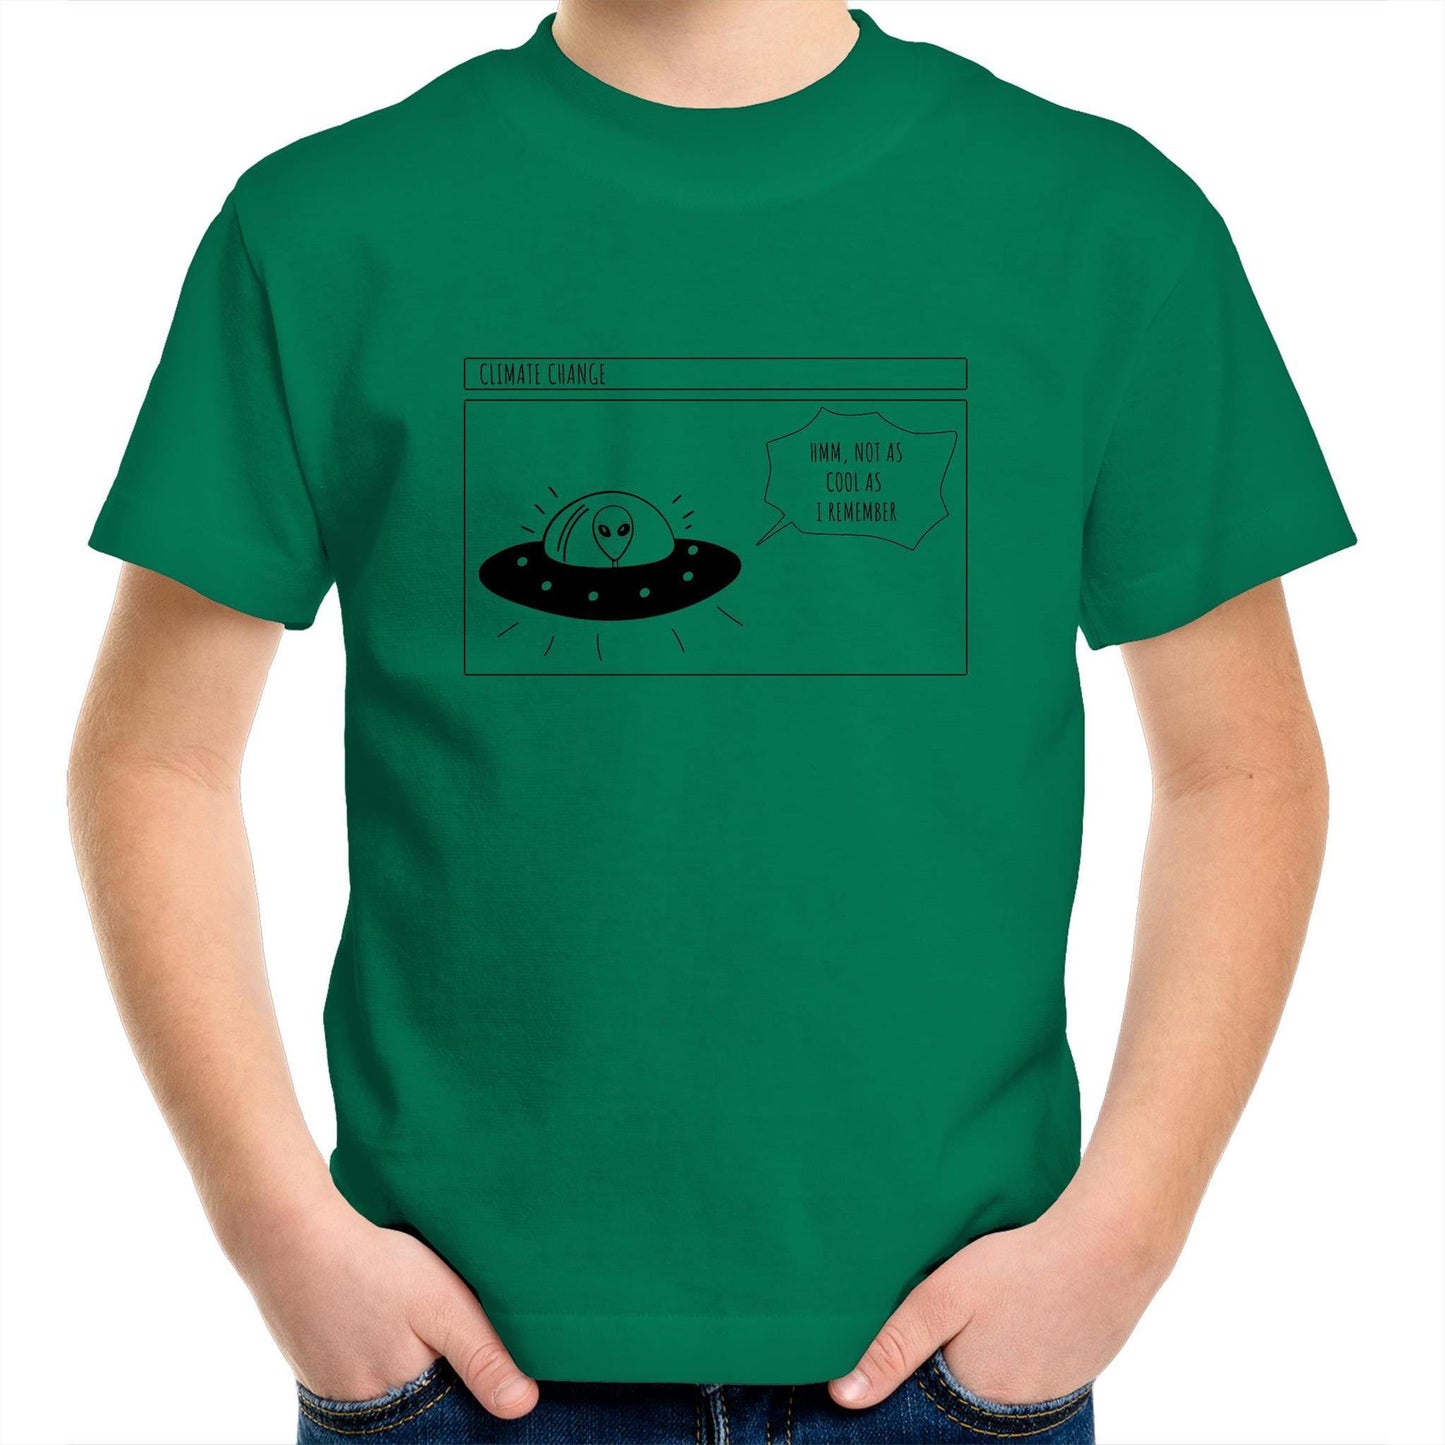 Alien Climate Change - Kids Youth Crew T-Shirt Kelly Green Kids Youth T-shirt Environment Retro Sci Fi Space